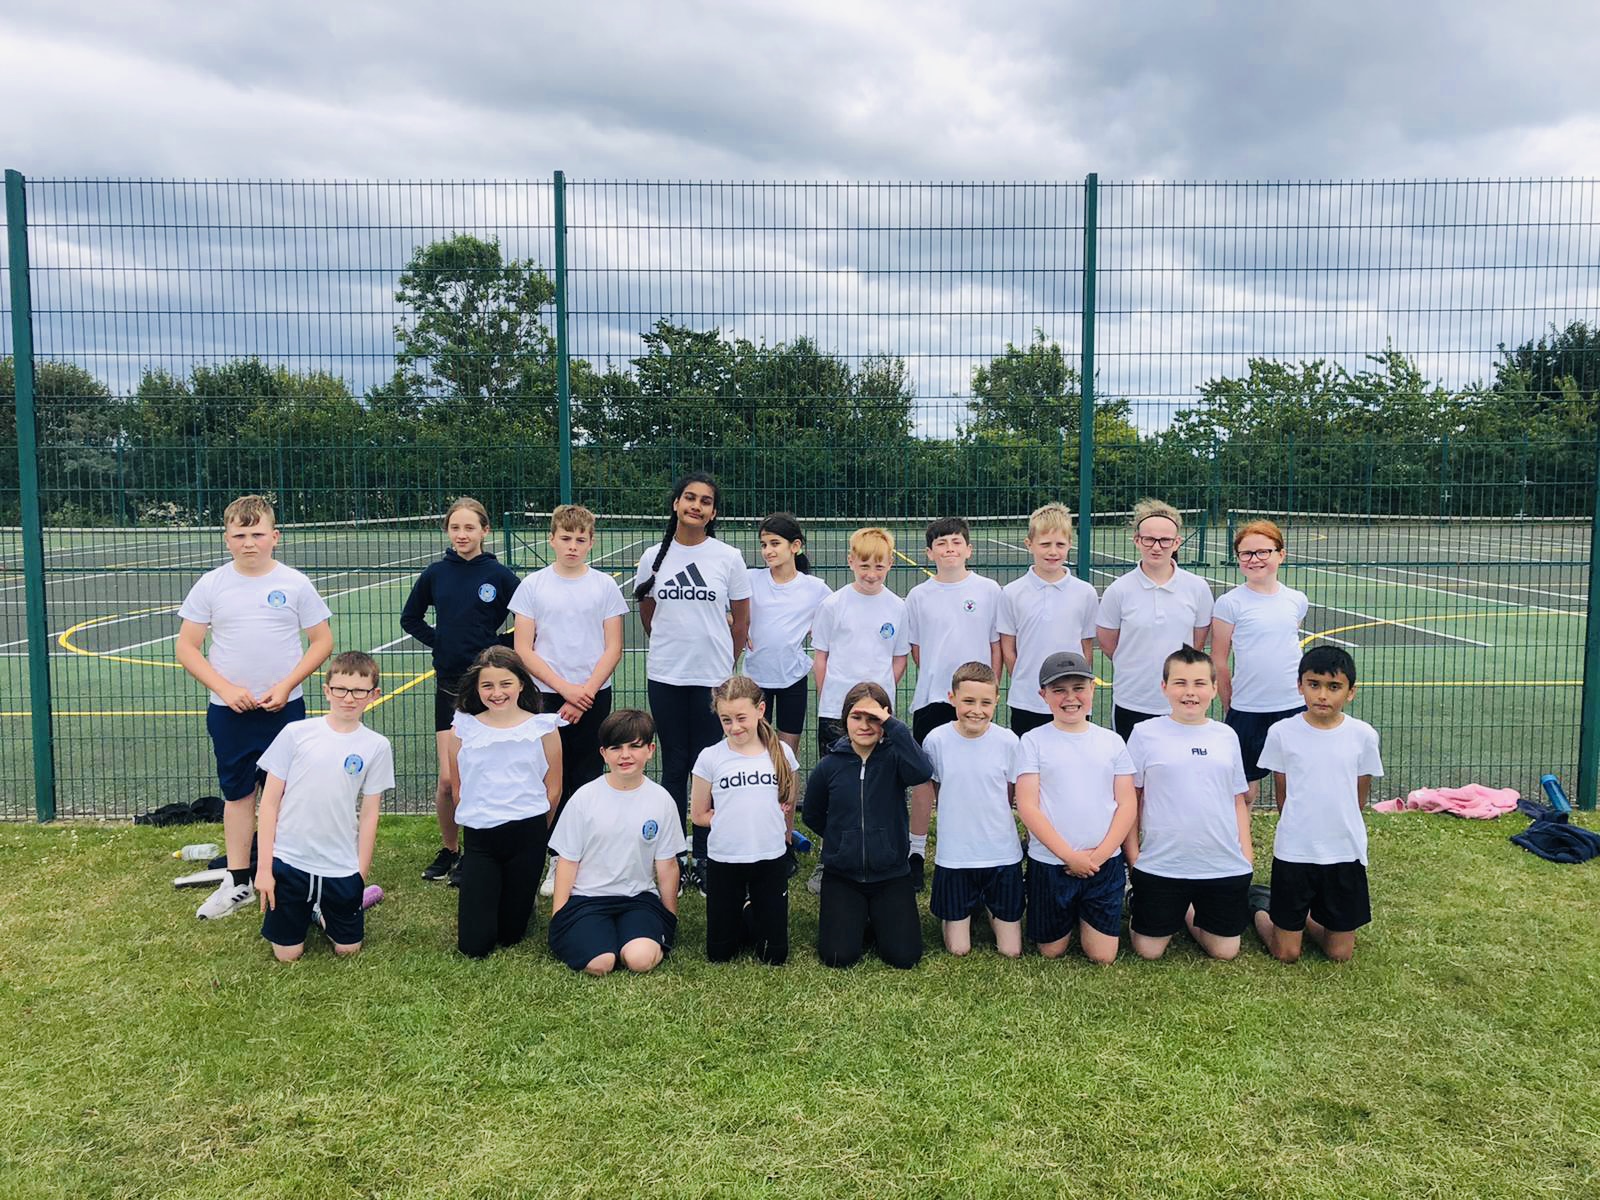 Year 6 Rounders Team at the local competition